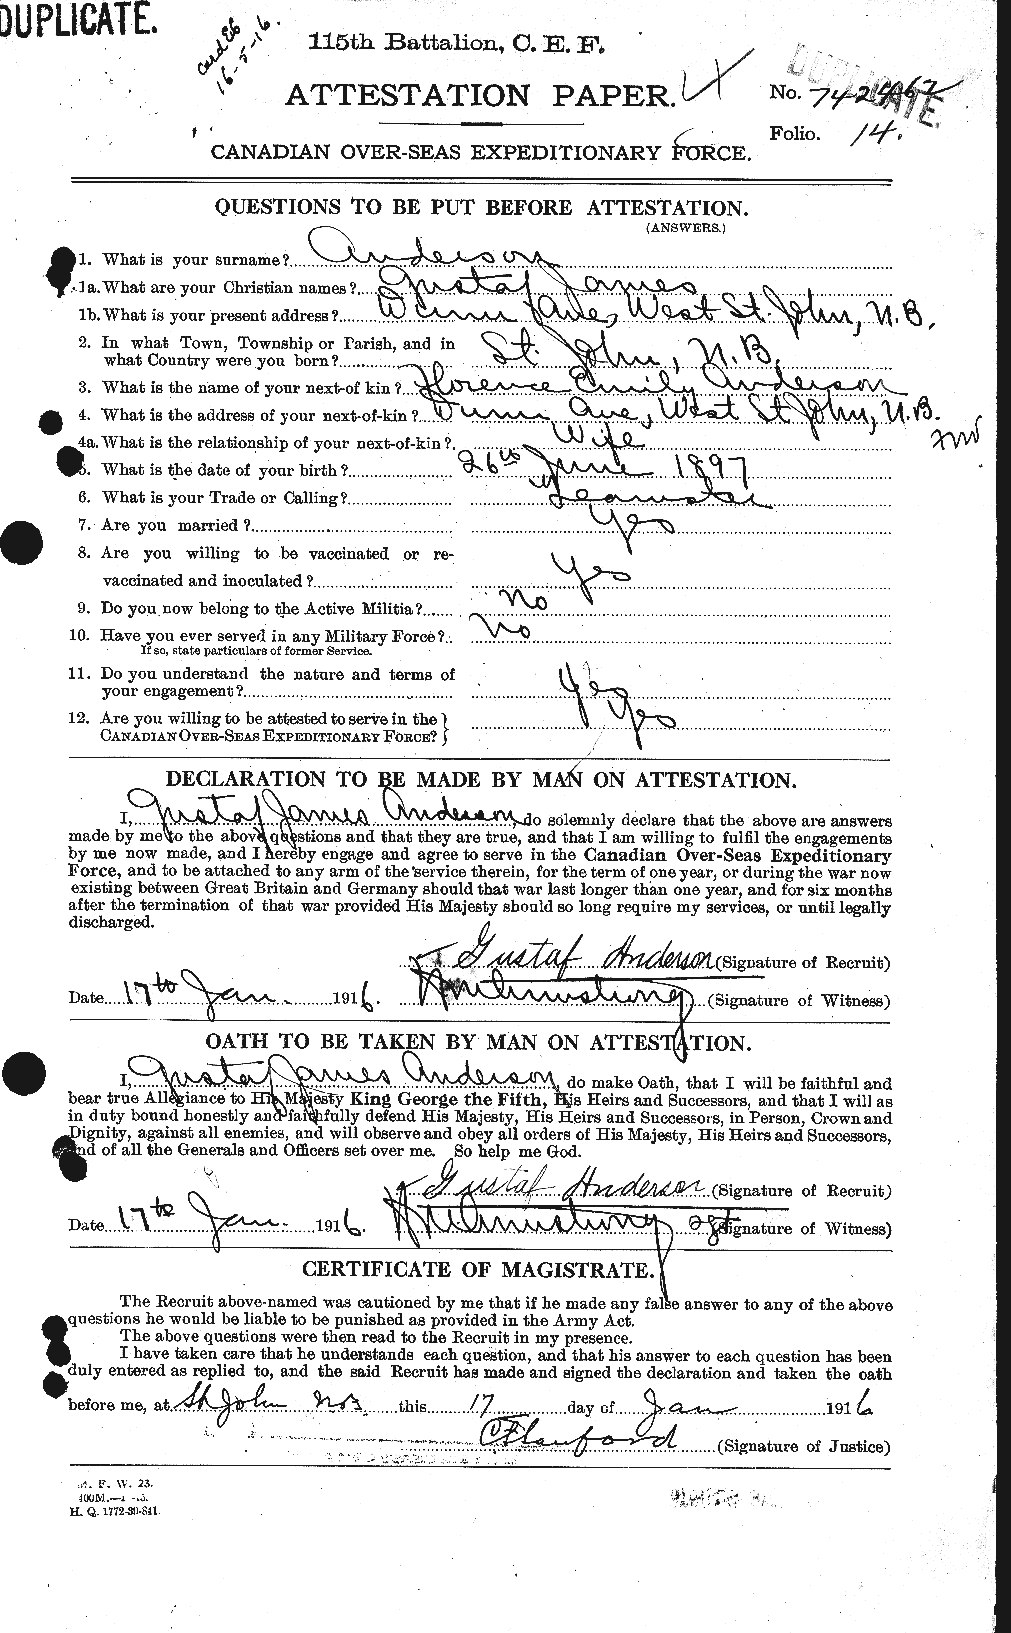 Personnel Records of the First World War - CEF 209648a